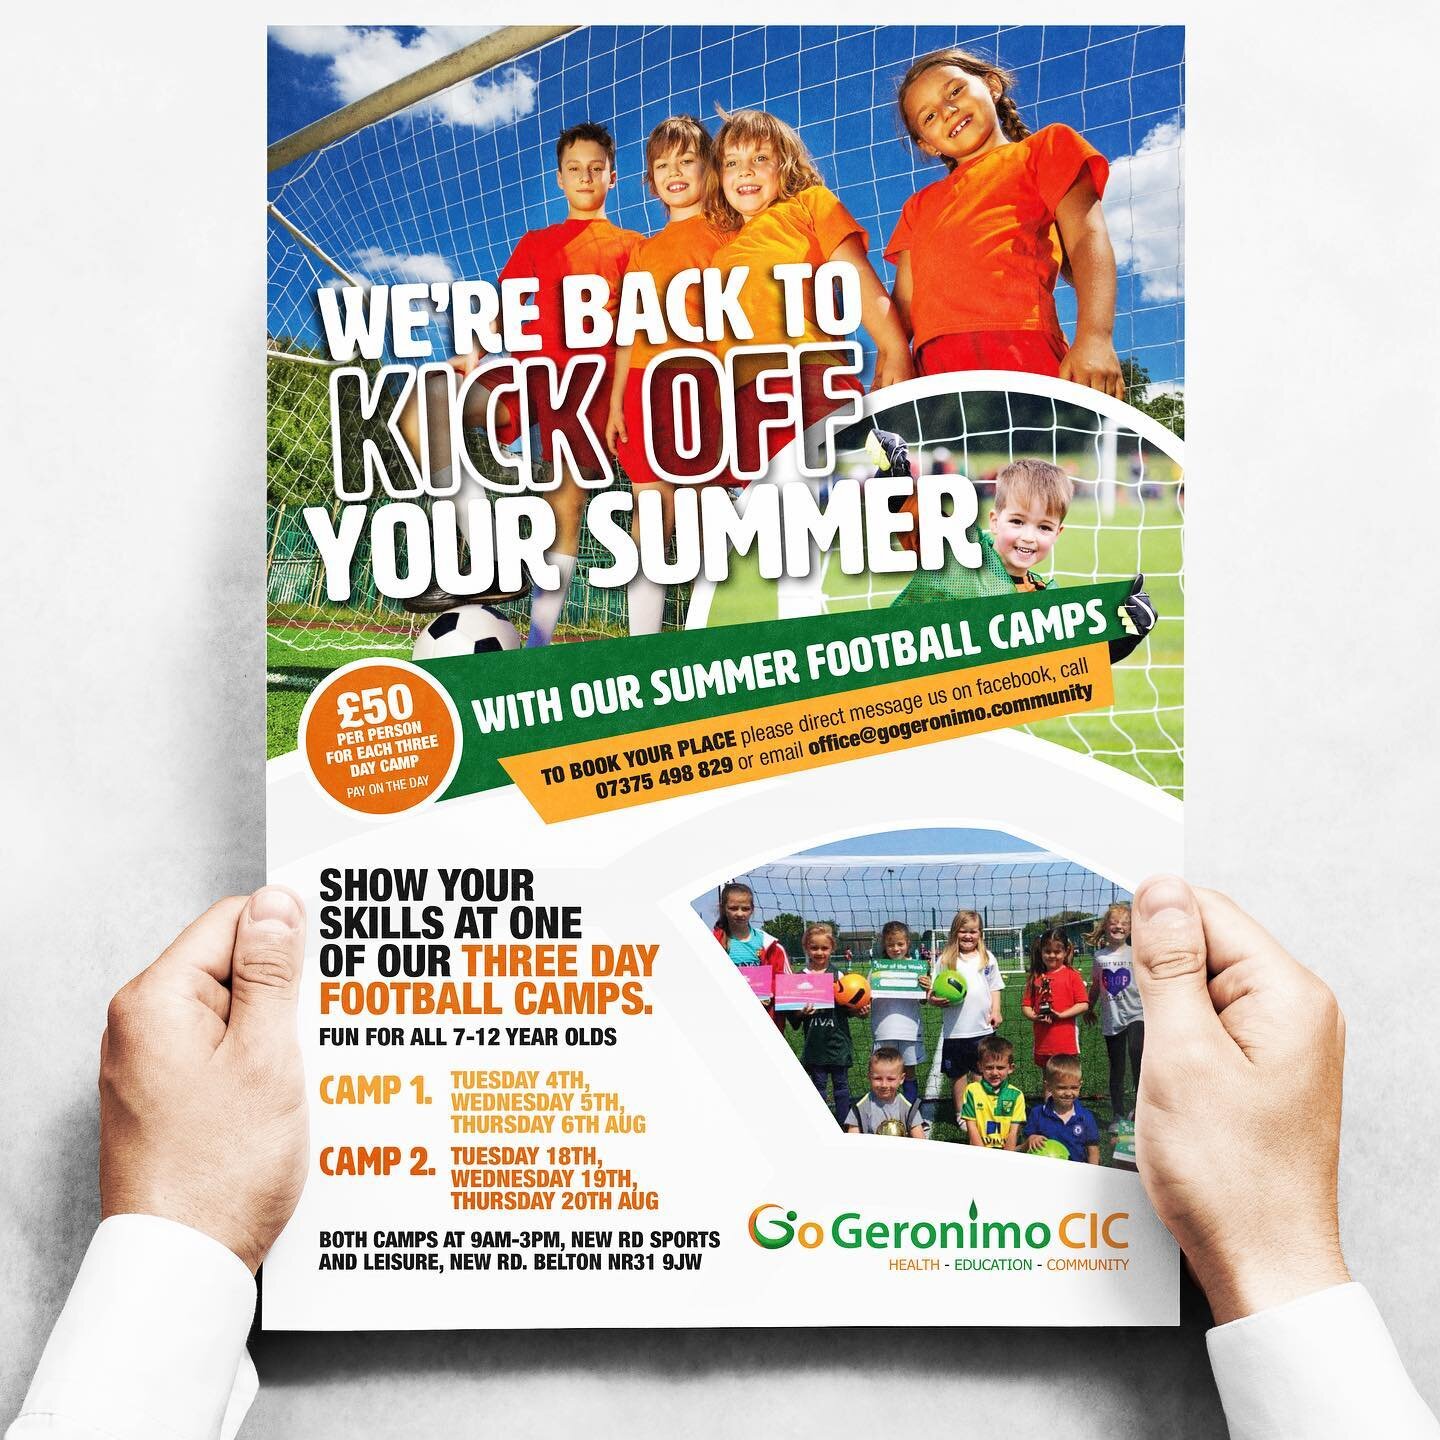 Advert/poster design for @gogeronimocic summer football camps for kids in the school holidays.

#graphicdesign #poster #design #designer #posterdesign #football #footballdesign #schoolholidays #summer #indesign #photoshop #adobe #creative #sport #nor